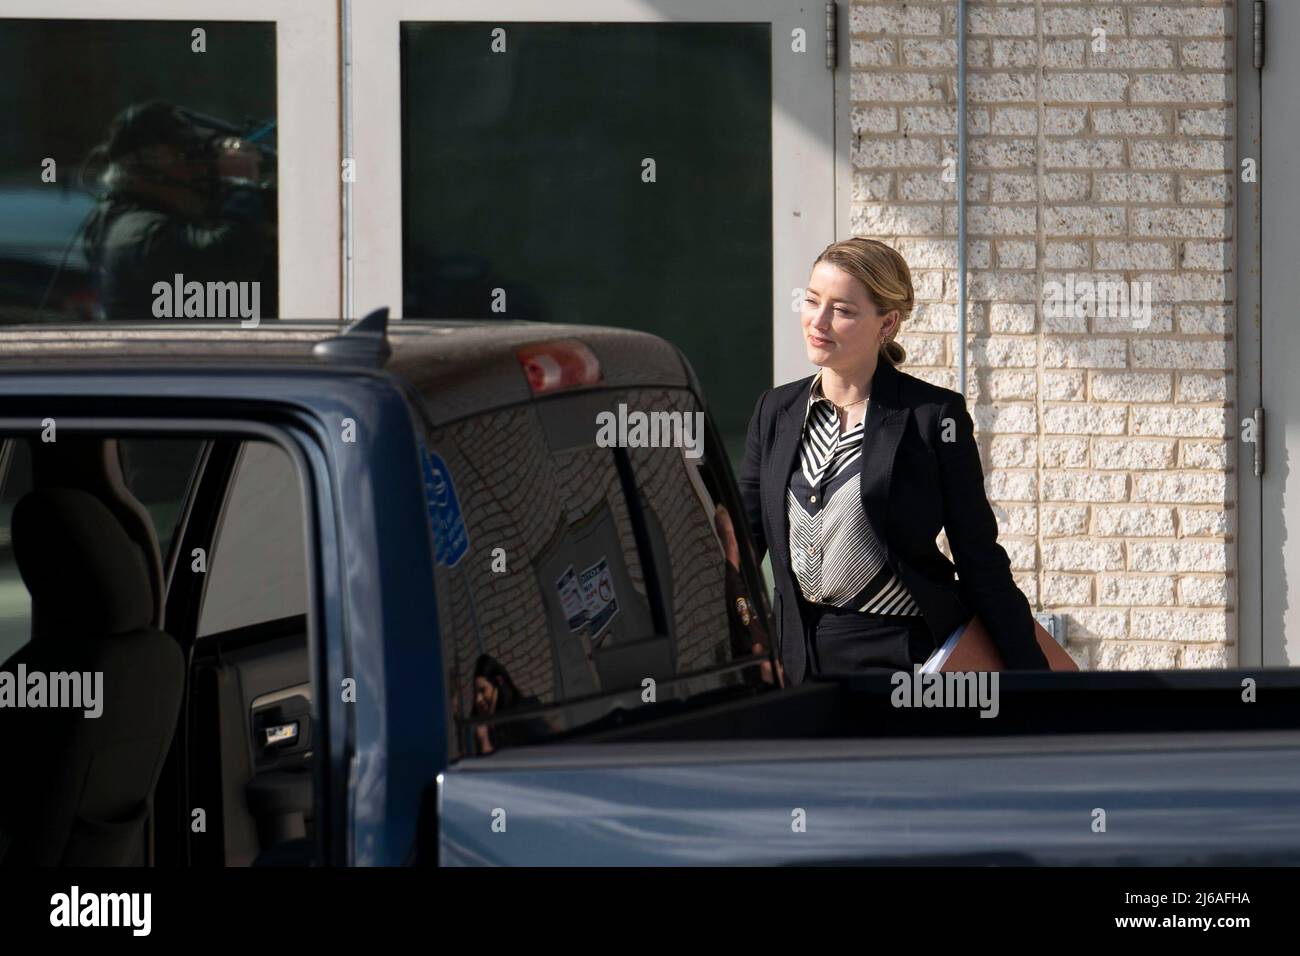 Actor Amber Heard departs from the Fairfax County Courthouse following Wednesday’s proceedings in the defamation case brought by actor Johnny Depp against his ex-wife in Fairfax, V.A., on Wednesday, April 27, 2022. Credit: Sarah Silbiger / CNP/Sipa USA (RESTRICTION: NO New York or New Jersey Newspapers or newspapers within a 75 mile radius of New York City) Stock Photo